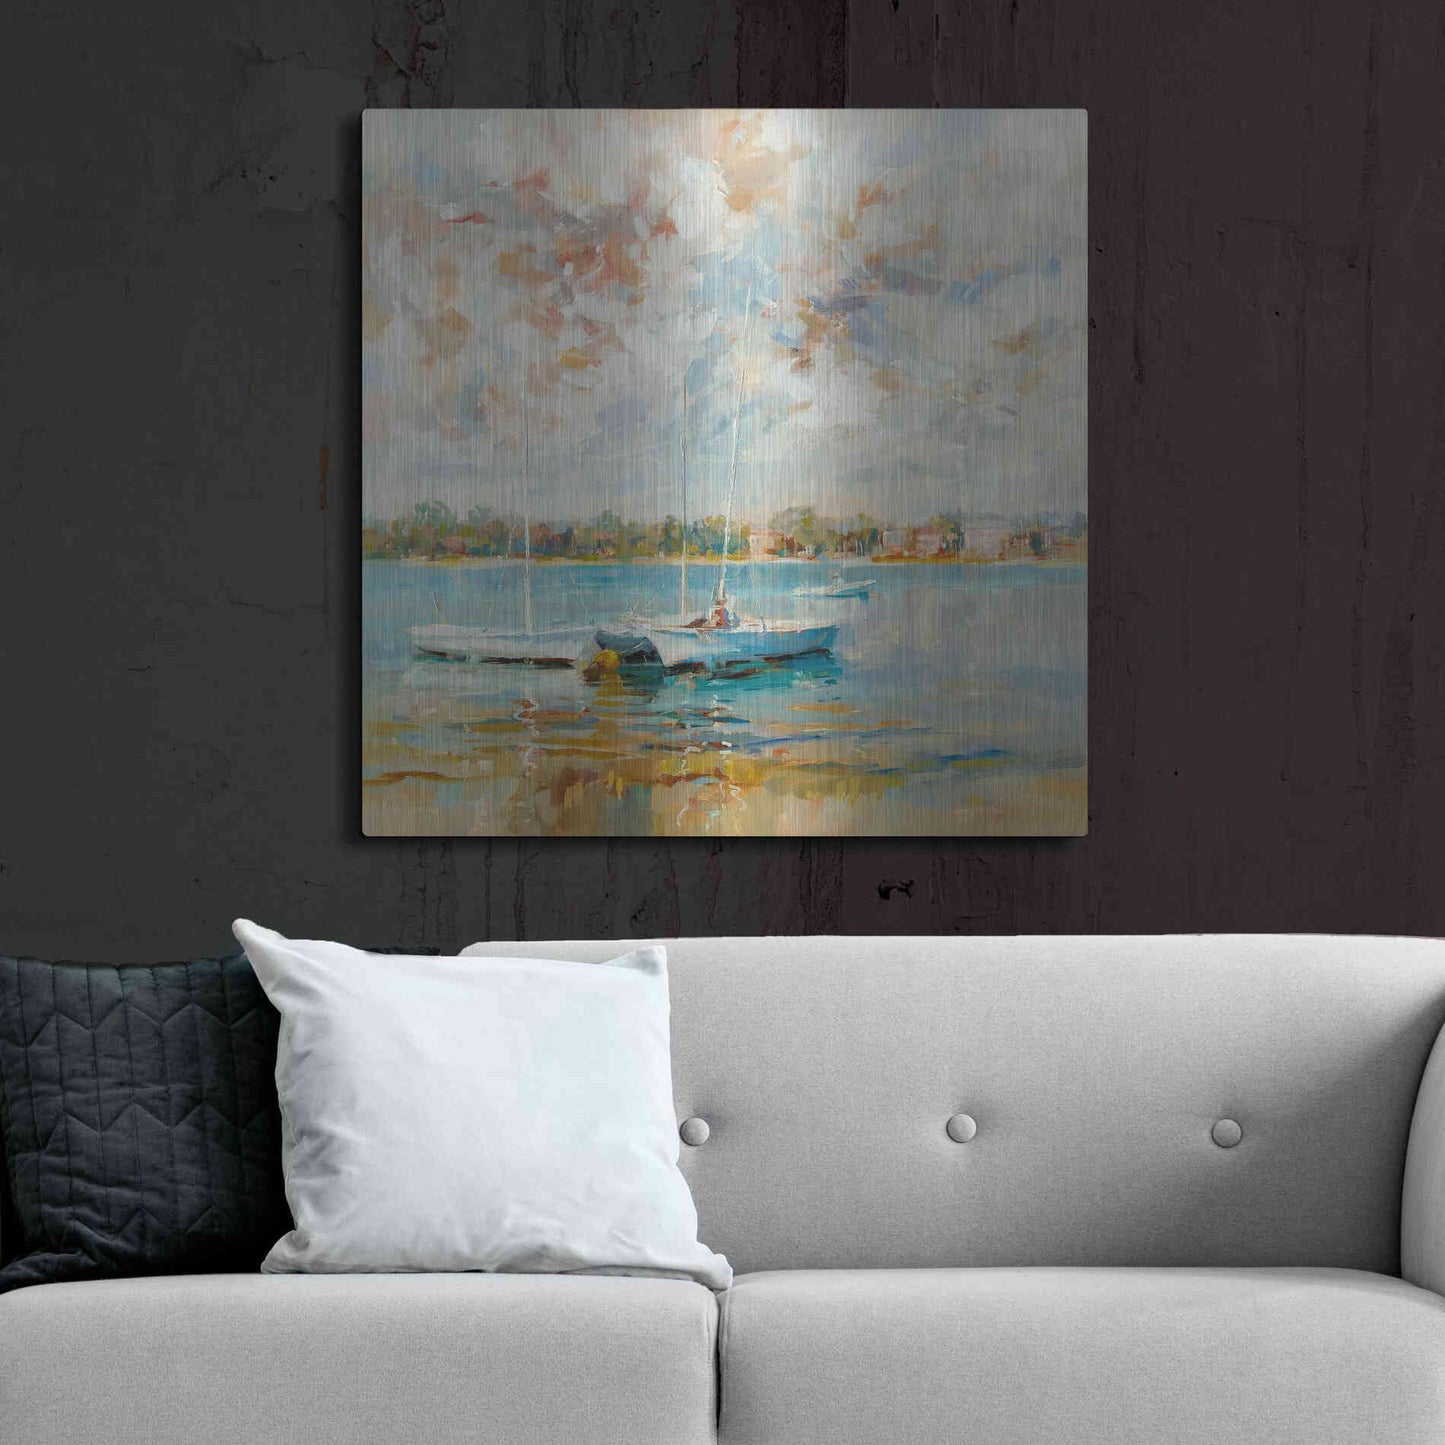 Luxe Metal Art 'At Water?s Edge' by Kasia Bruniany Metal Wall Art,36x36